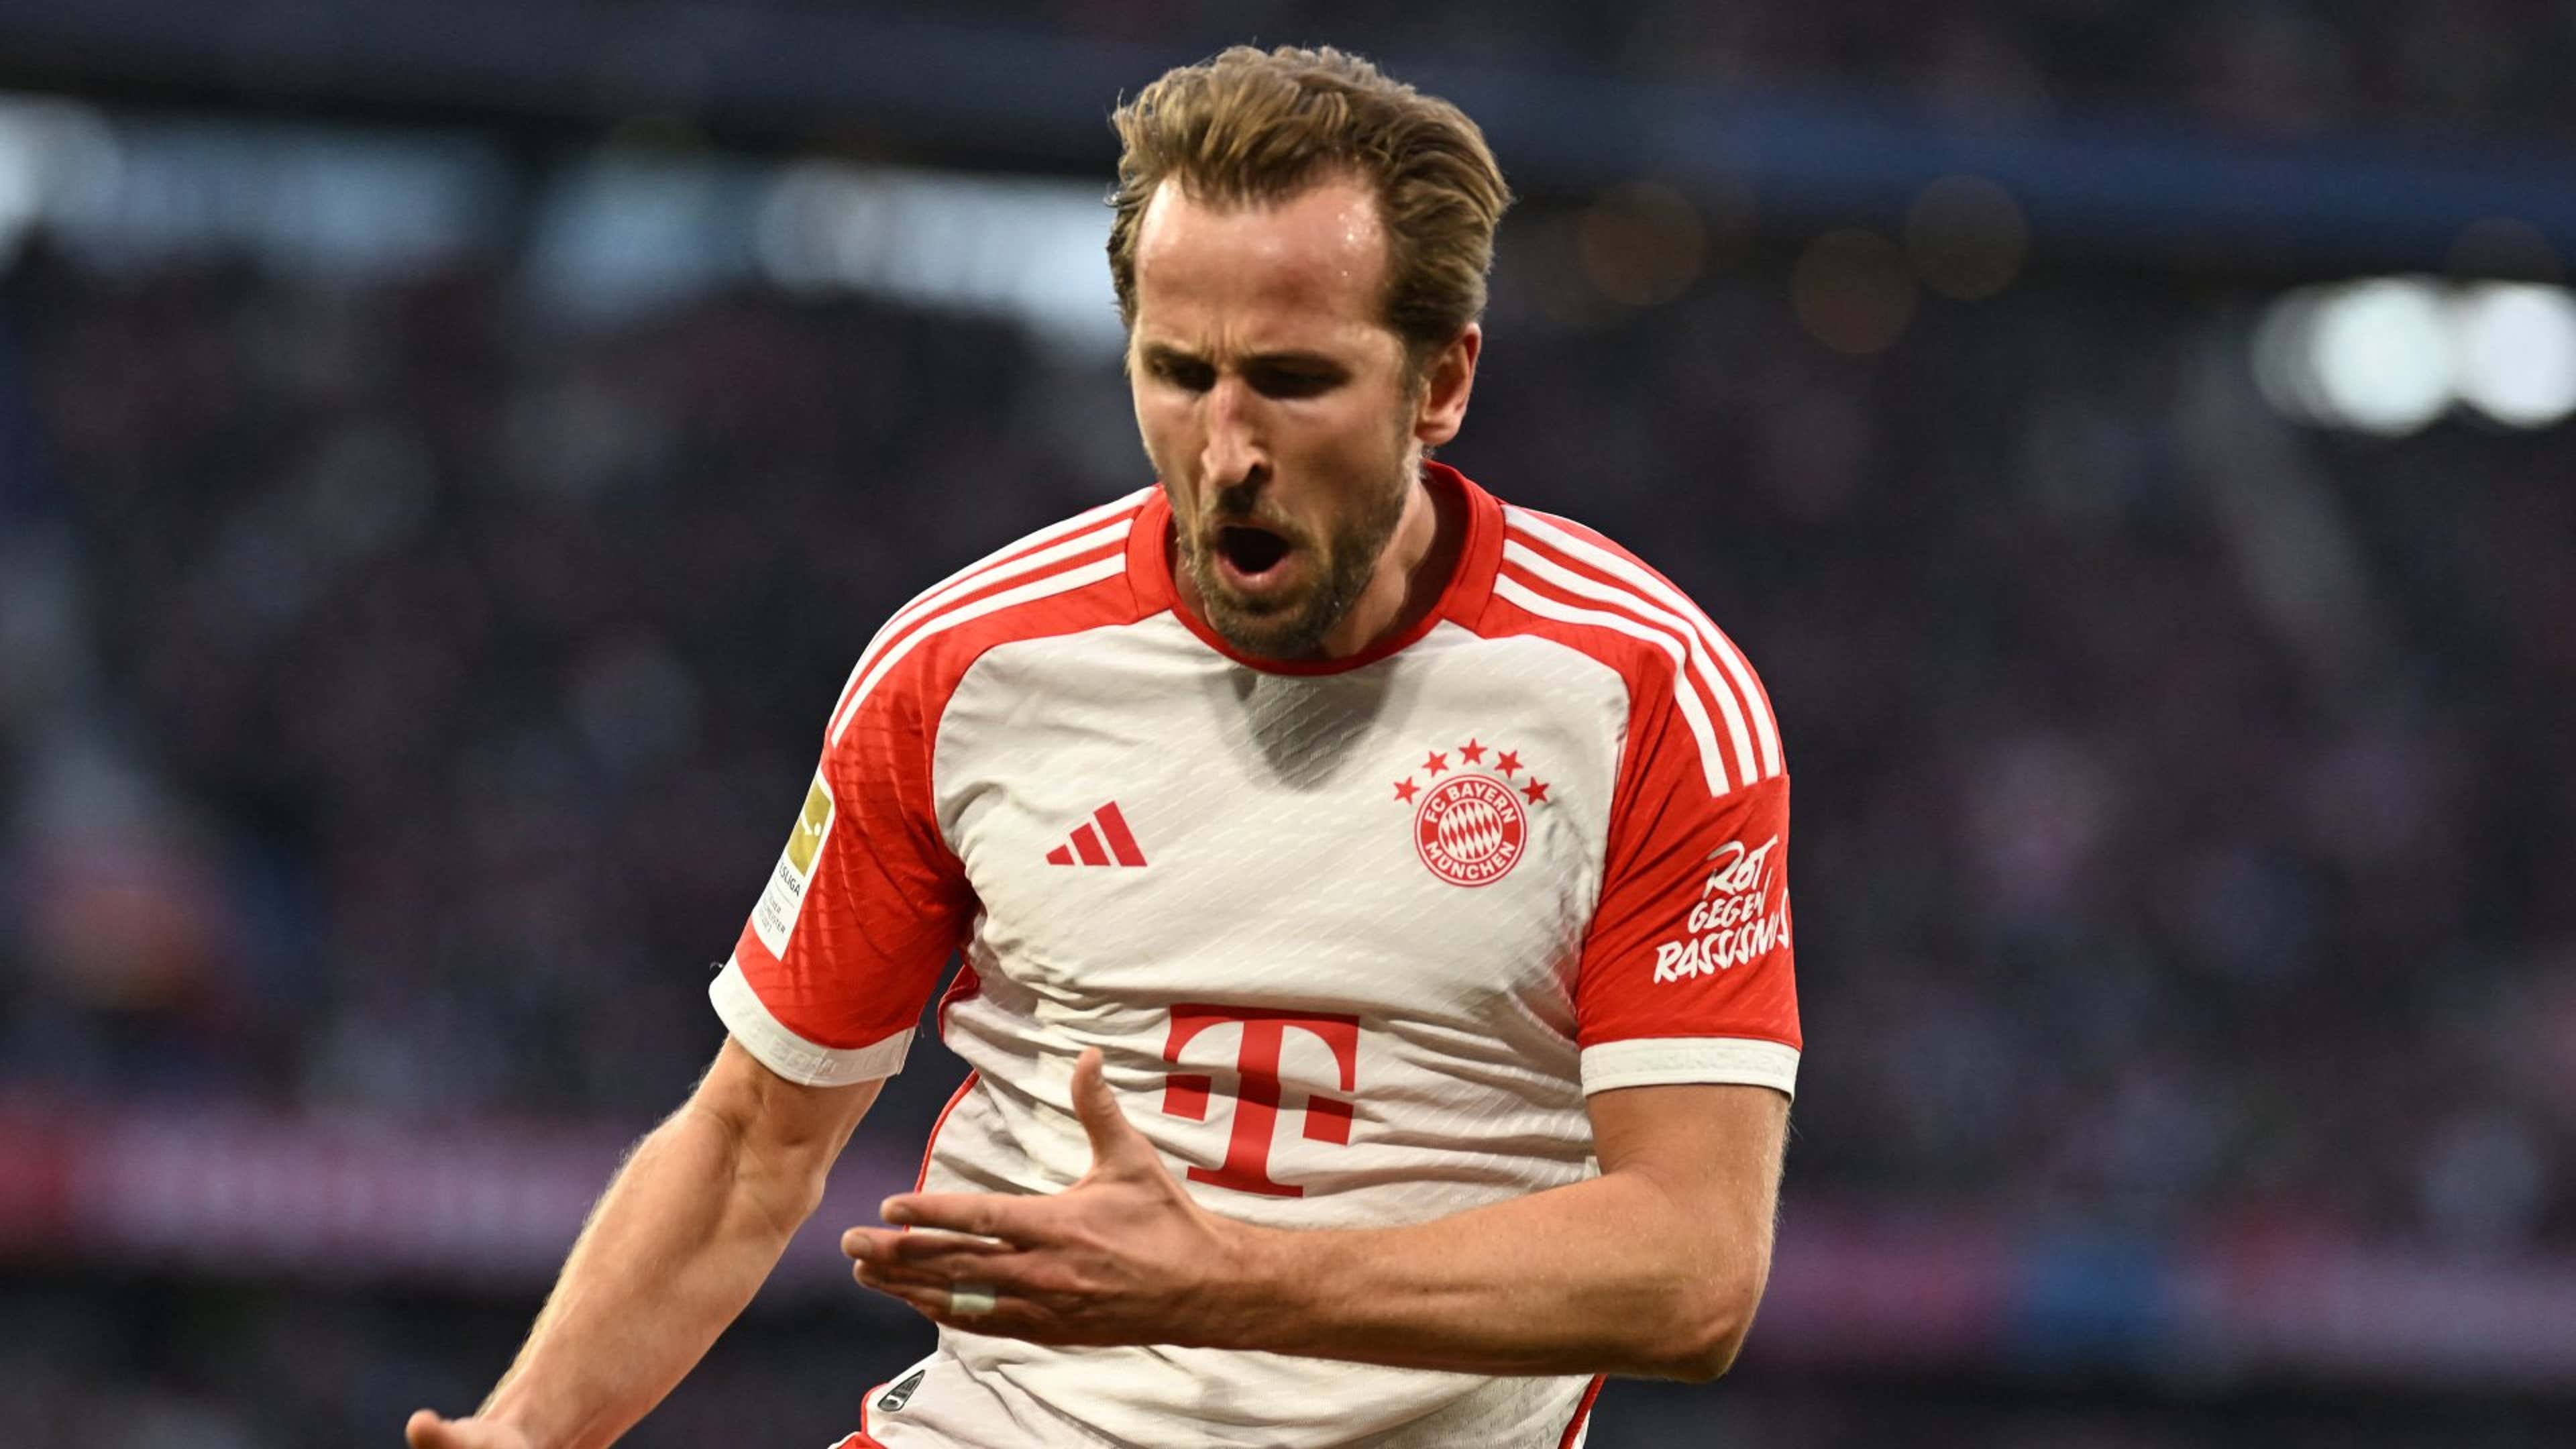 Breath of fresh air' - Harry Kane hailed as a 'blessing' for Bayern after scoring 24 goals for a Bayern team 'not playing well' | Goal.com